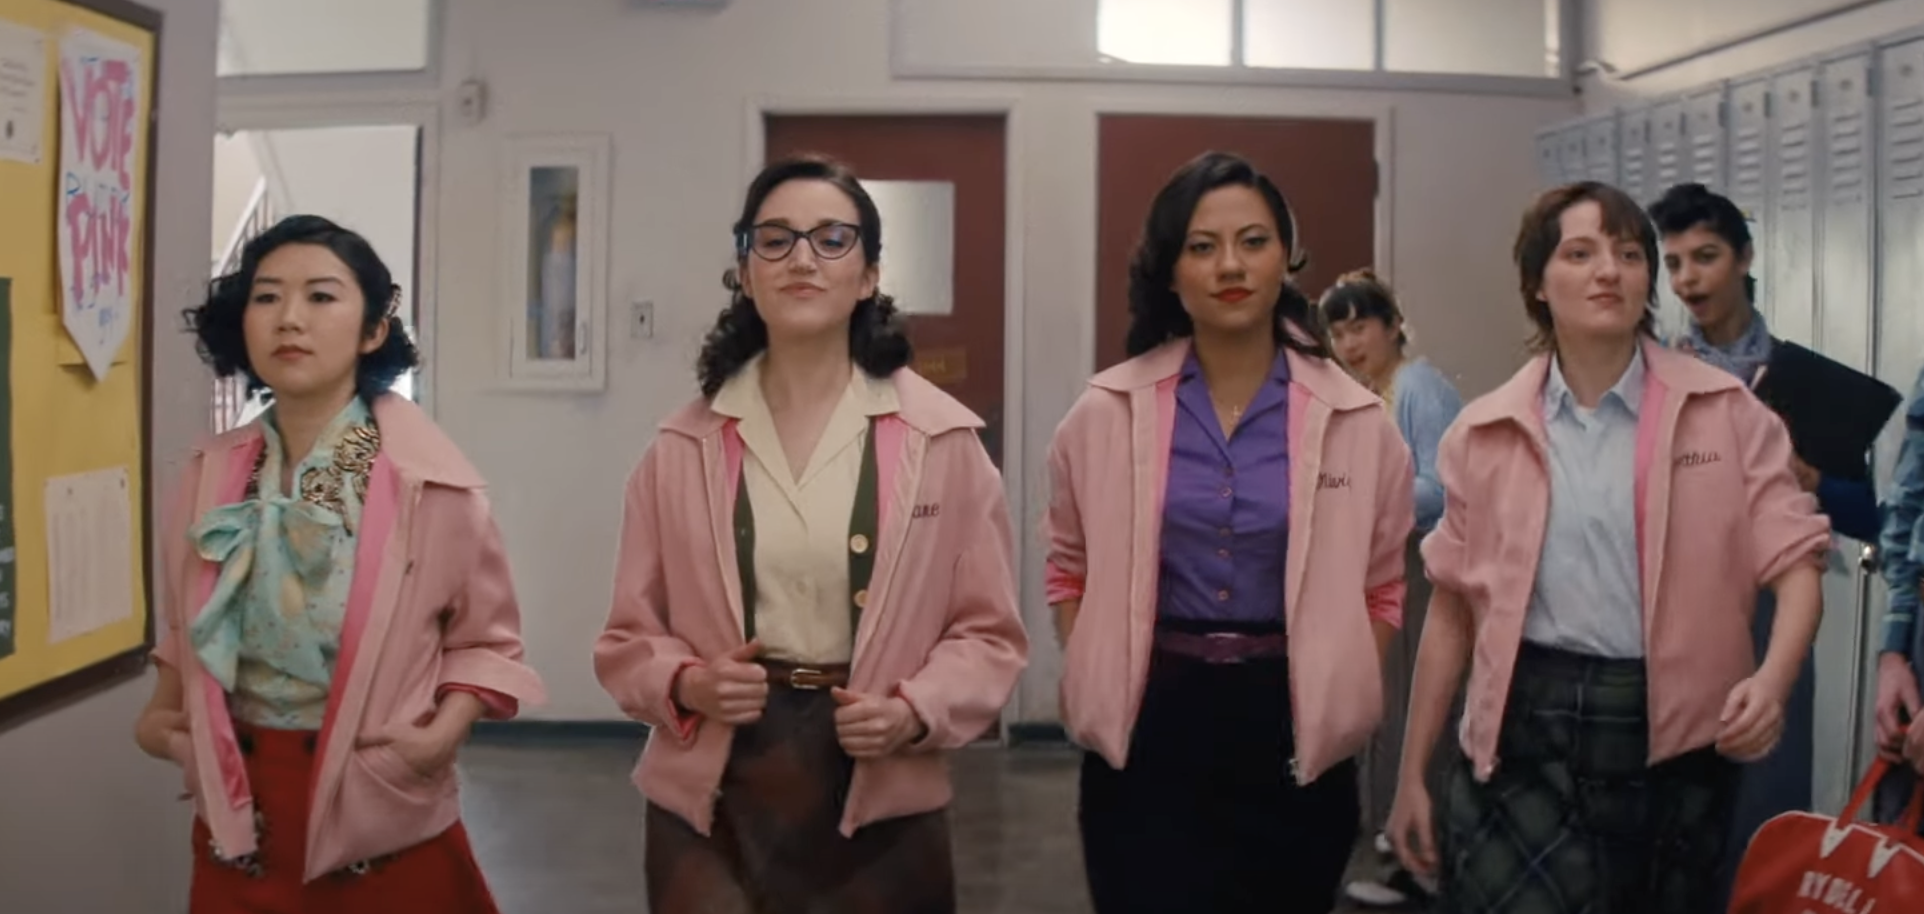 Pink is the Vibe in ‘Grease: Rise of the Pink Ladies’ Trailer